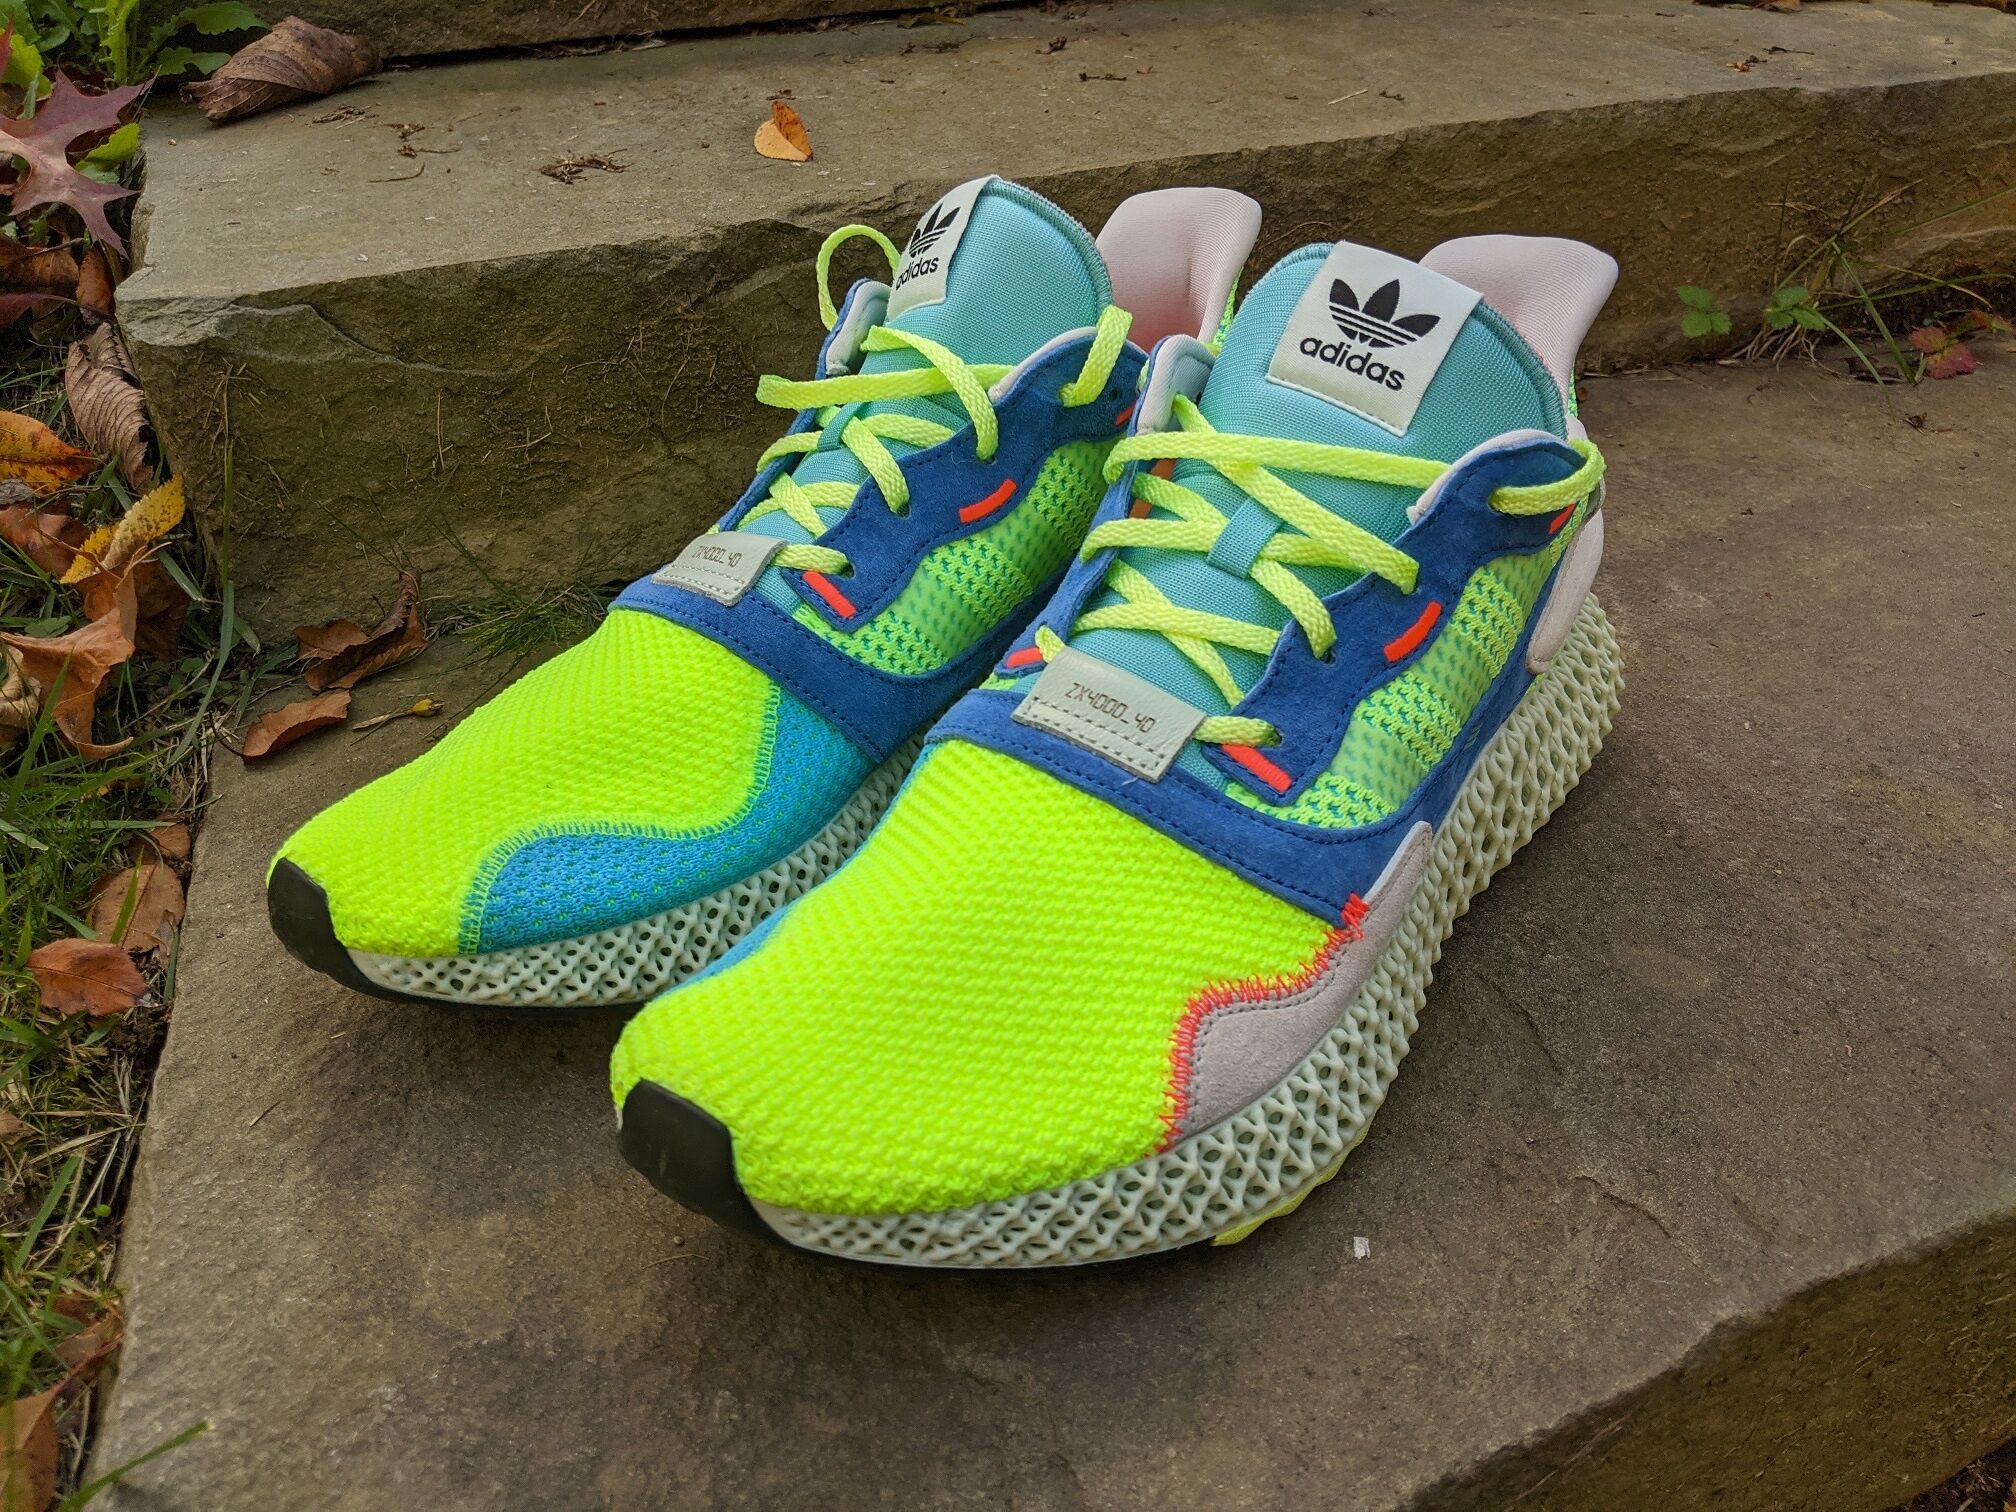 indsats Foreman snap Adidas ZX-4000 4D “Easy Mint”: 100 Wears Review - 100wears